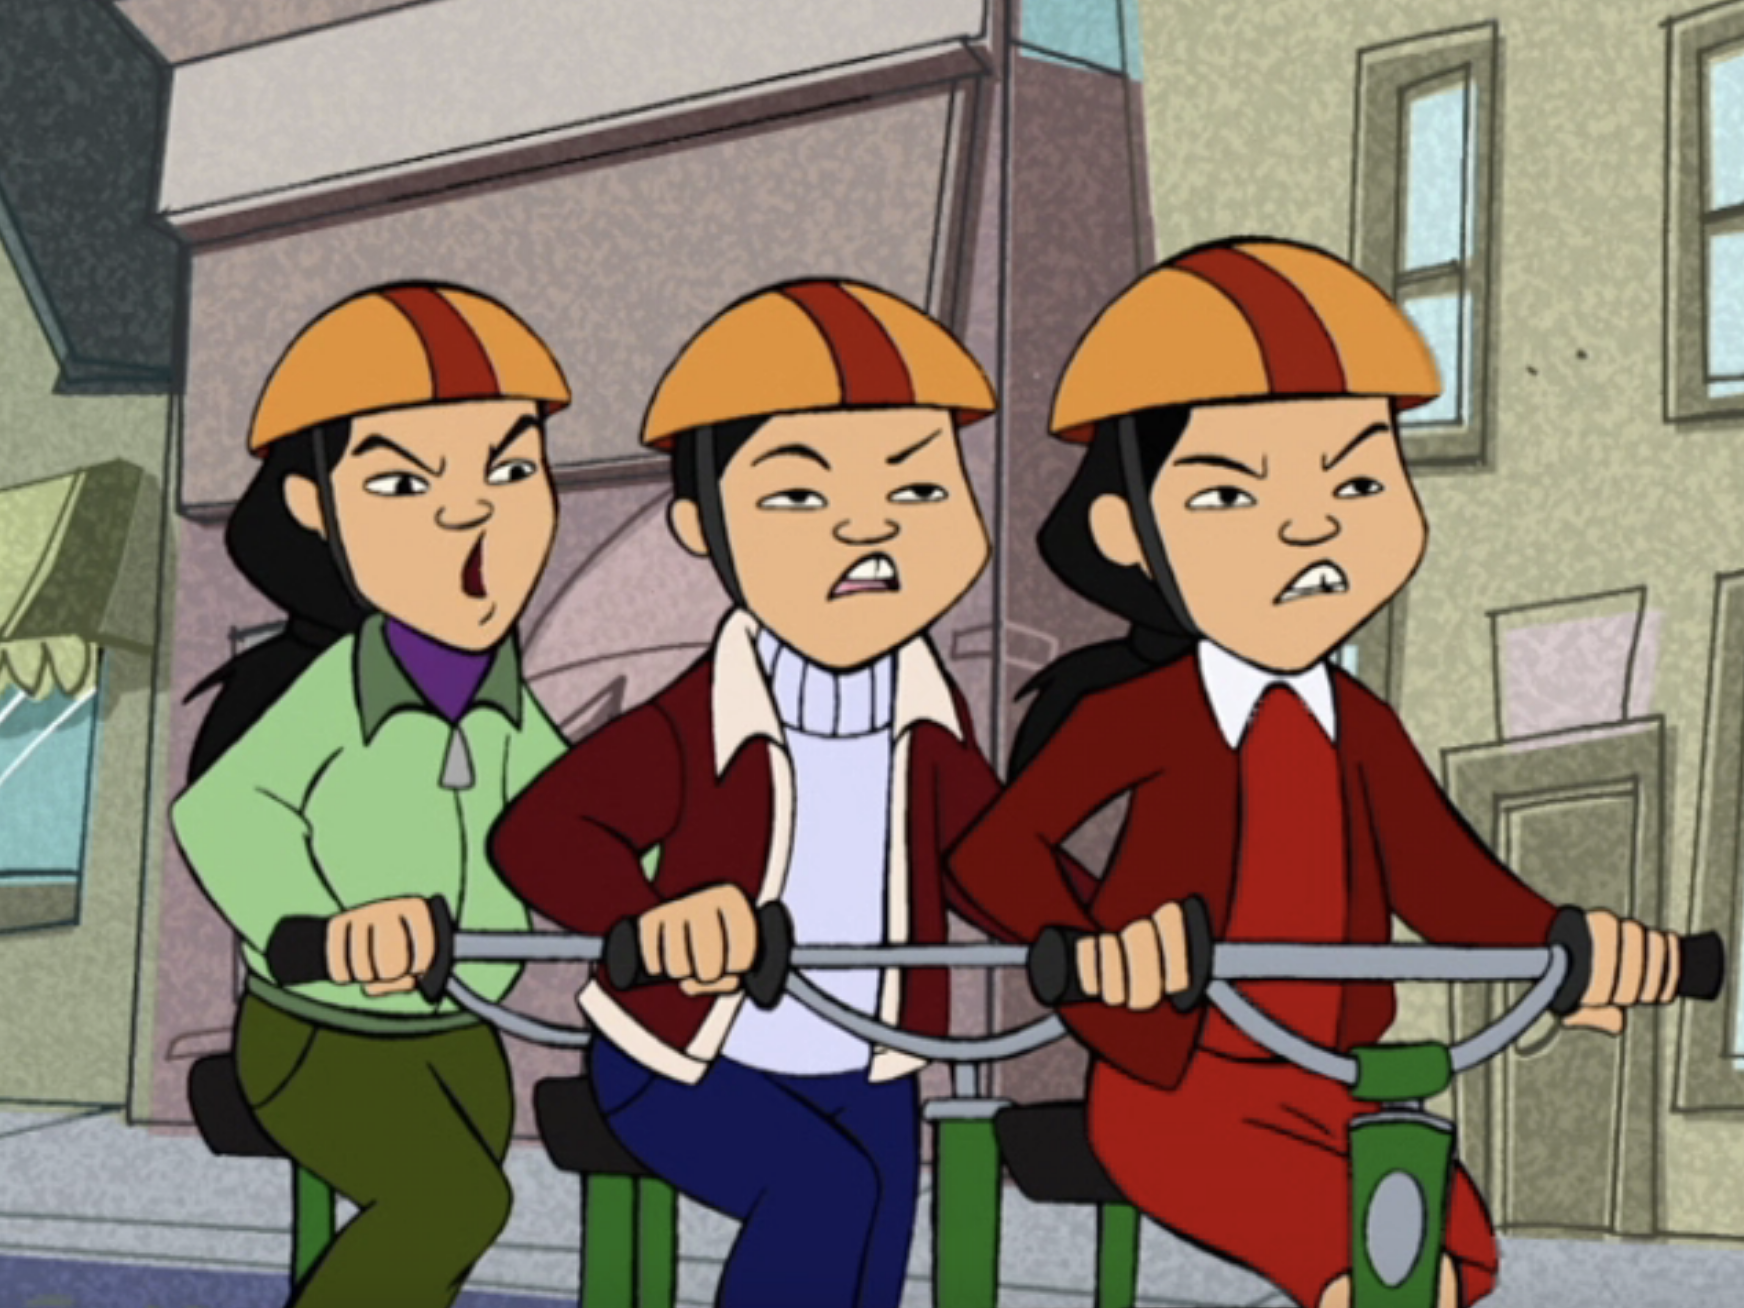 the Chang triplets in the original show